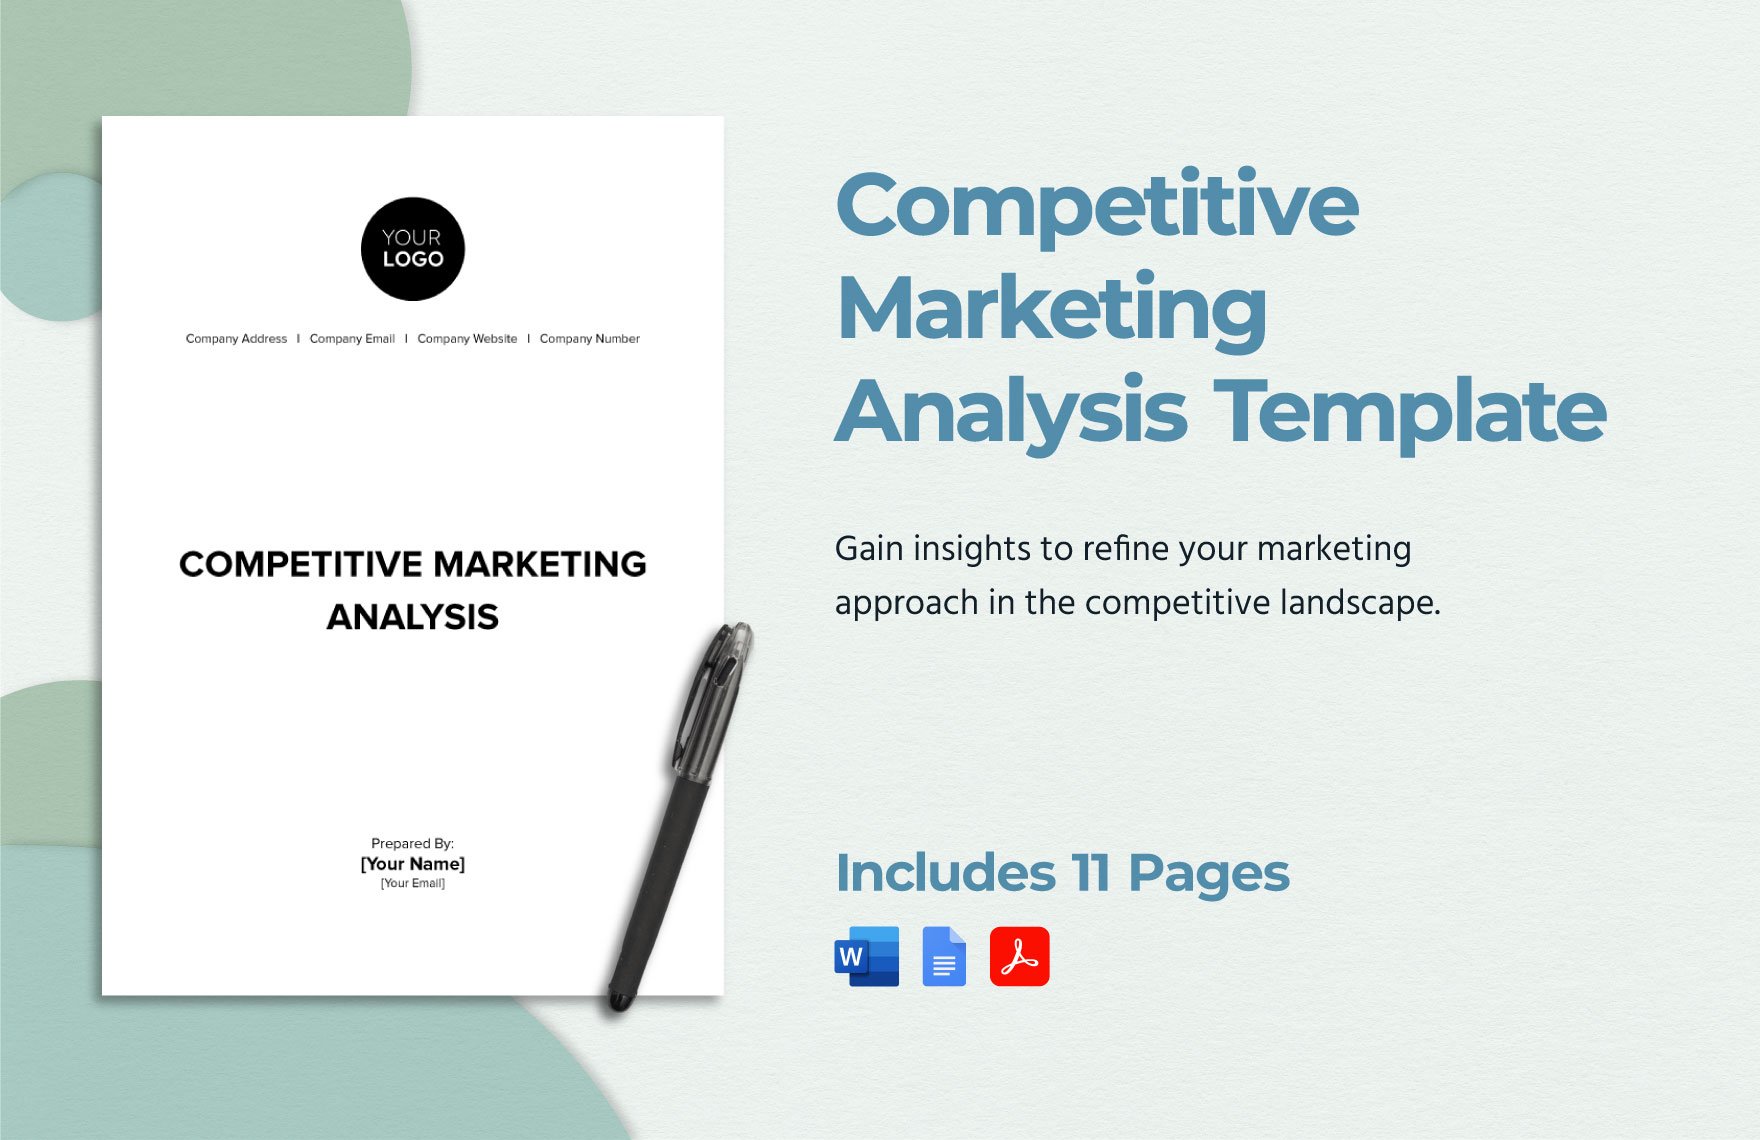 Competitive Marketing Analysis Template in Word, Google Docs, PDF